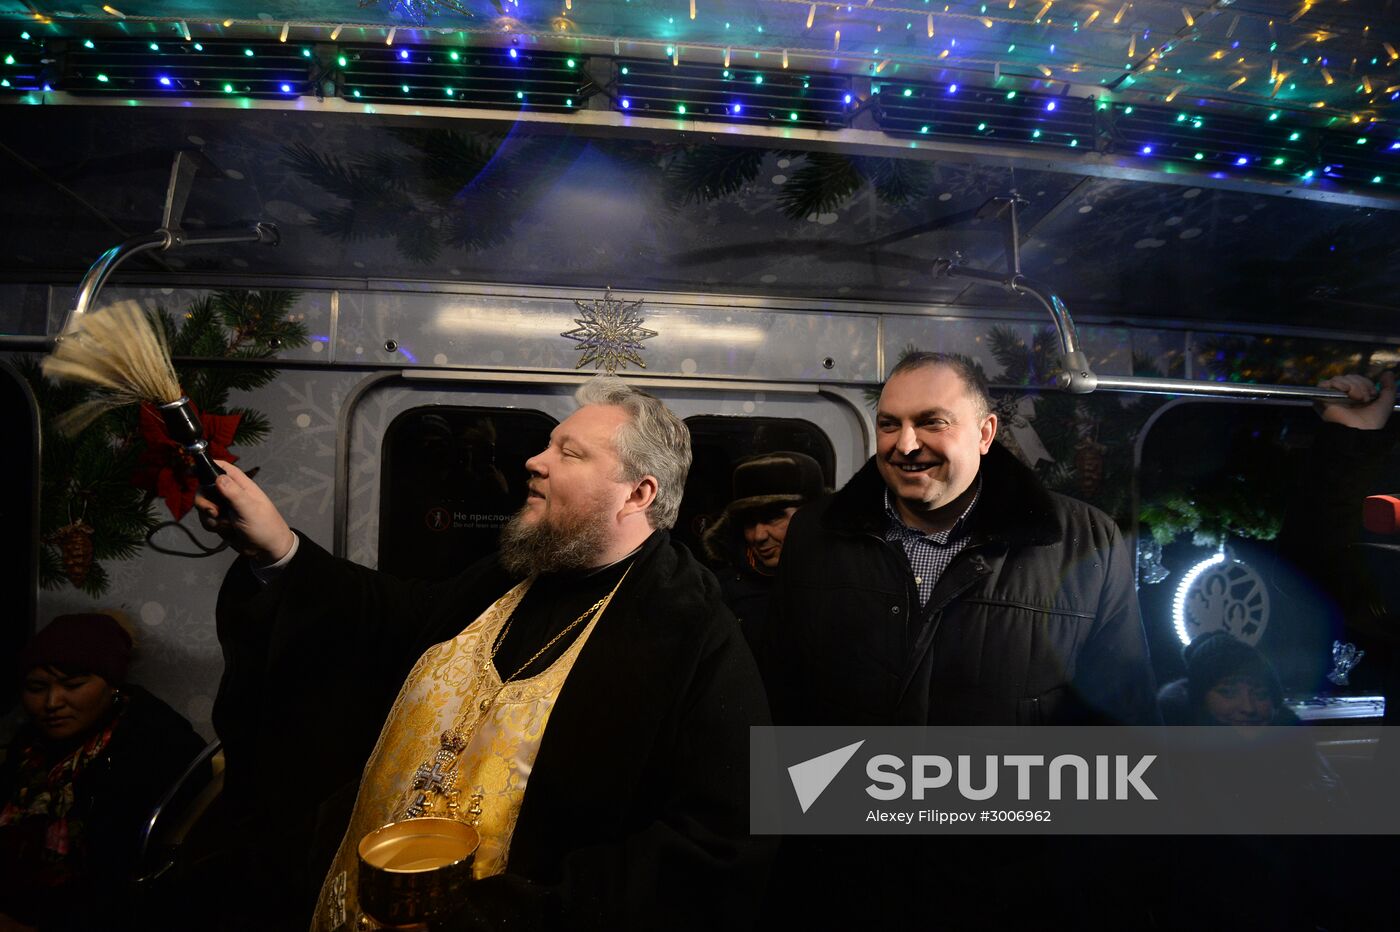 Presentration of Christmas car of Moscow Metro's New Year train